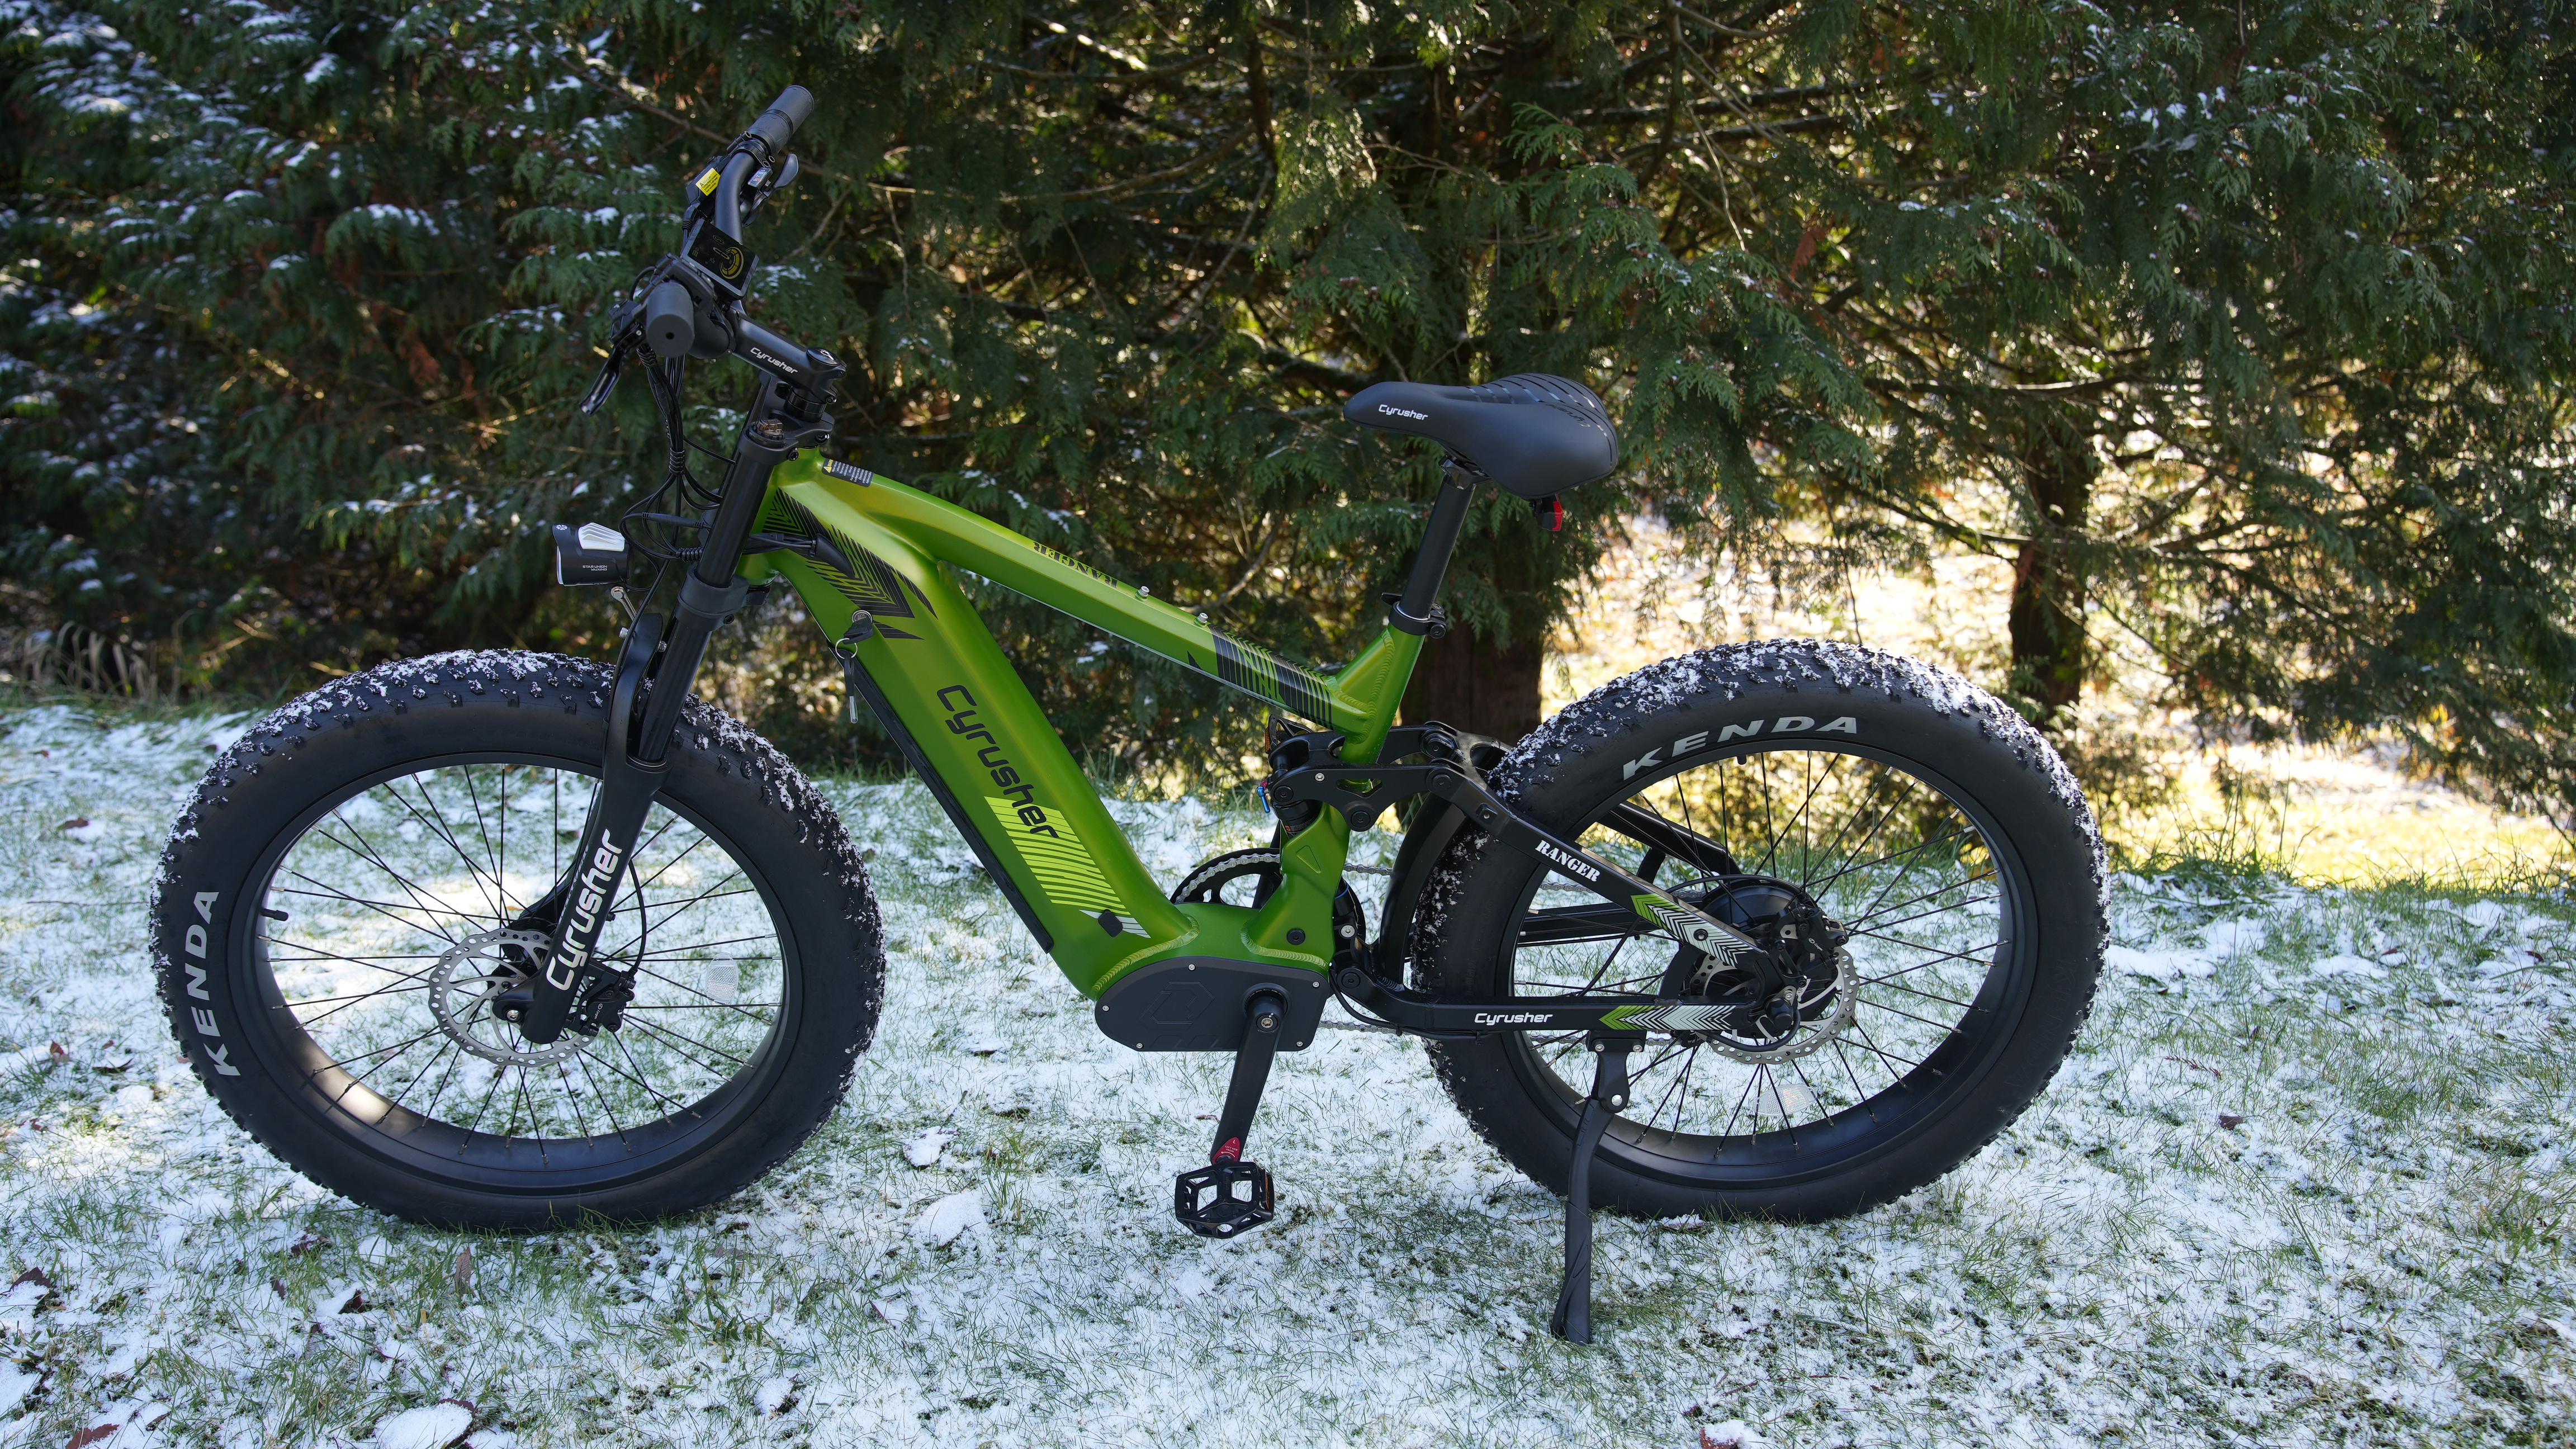 This heavy-duty e-bike had me flying off-road, grinning from ear